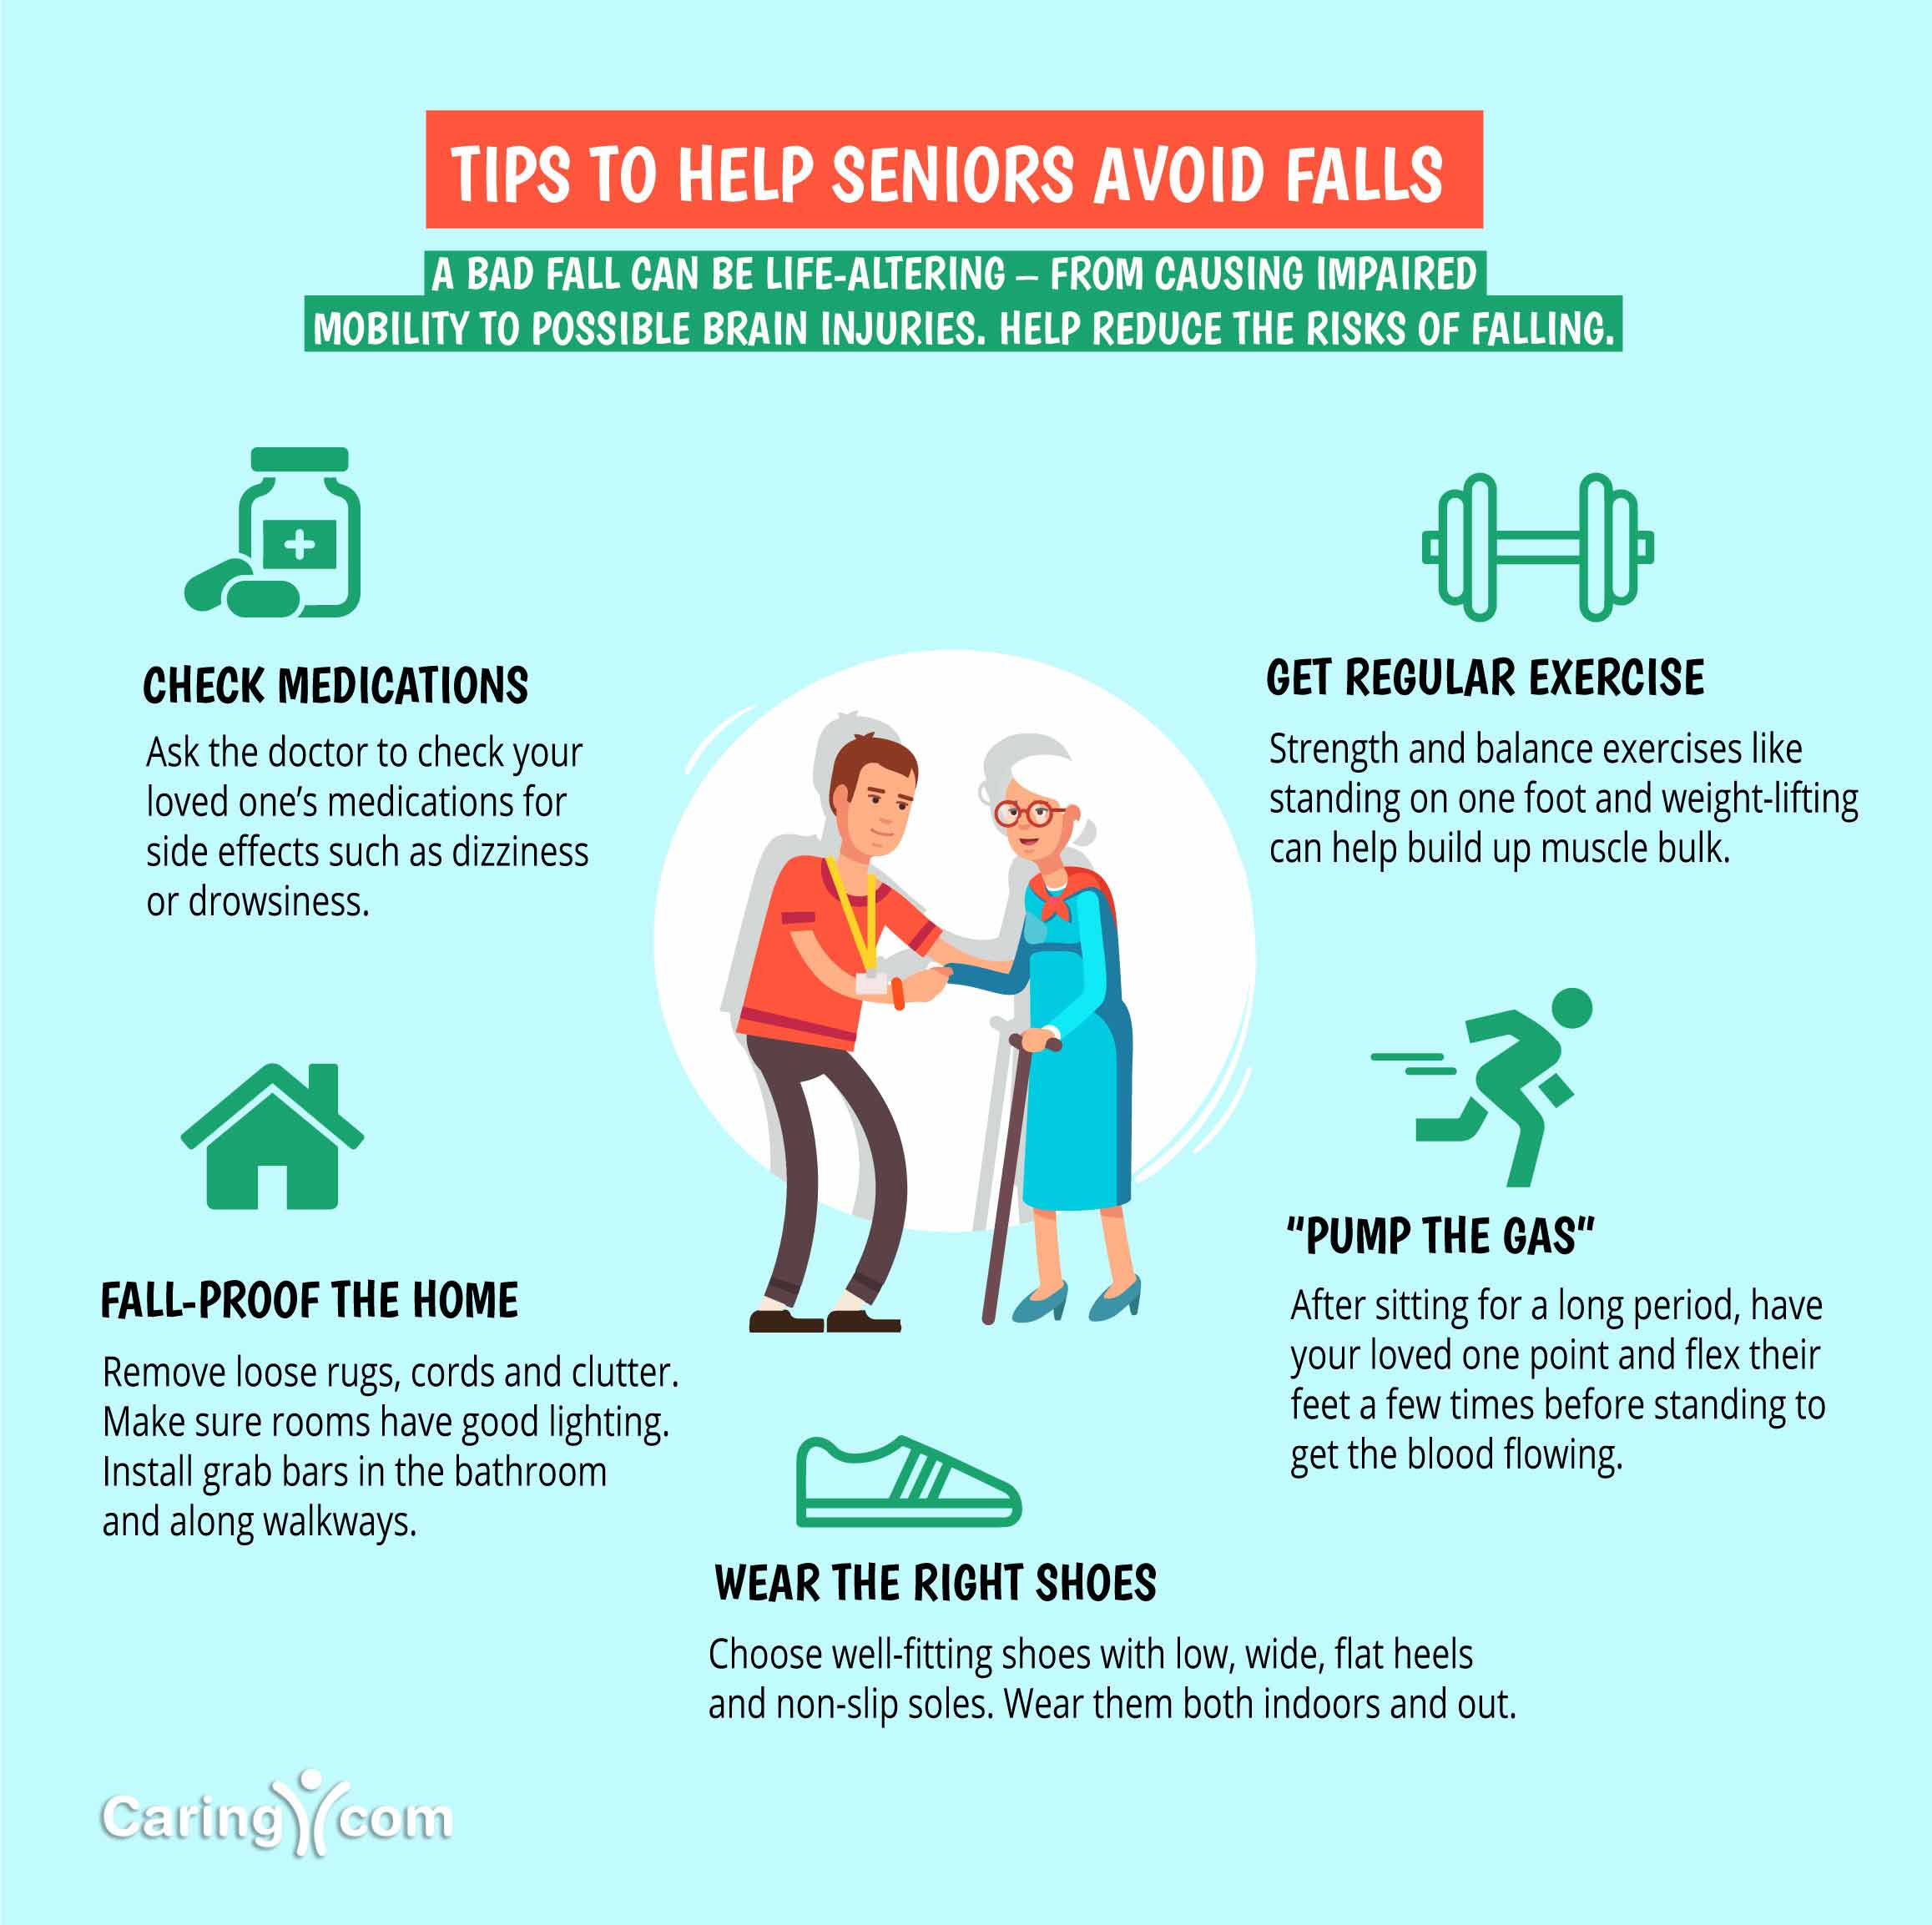 Fall prevention tips to avoid injury